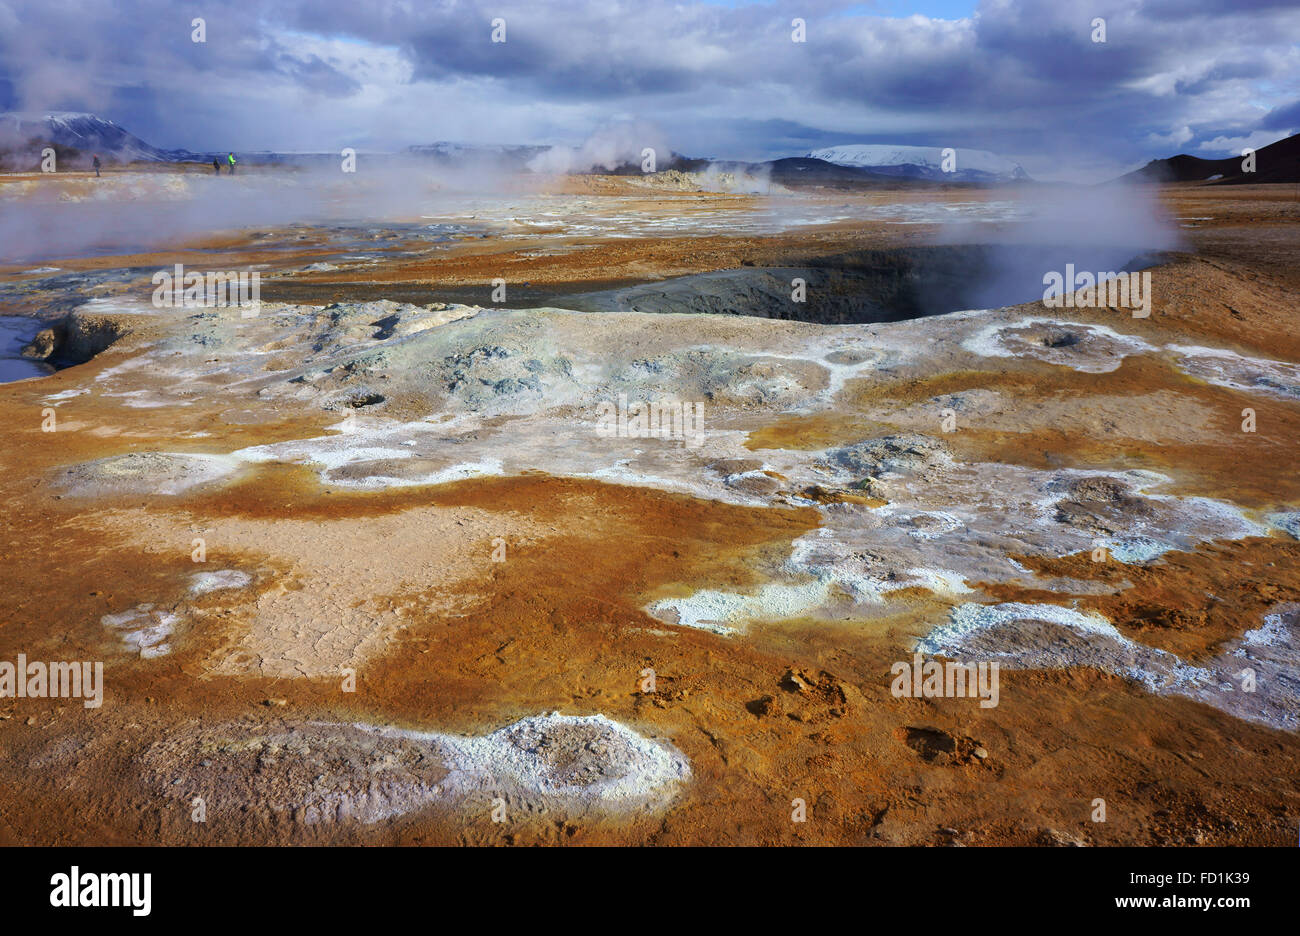 People watching boiling mud pots at Namaskard geothermal area, Iceland Stock Photo